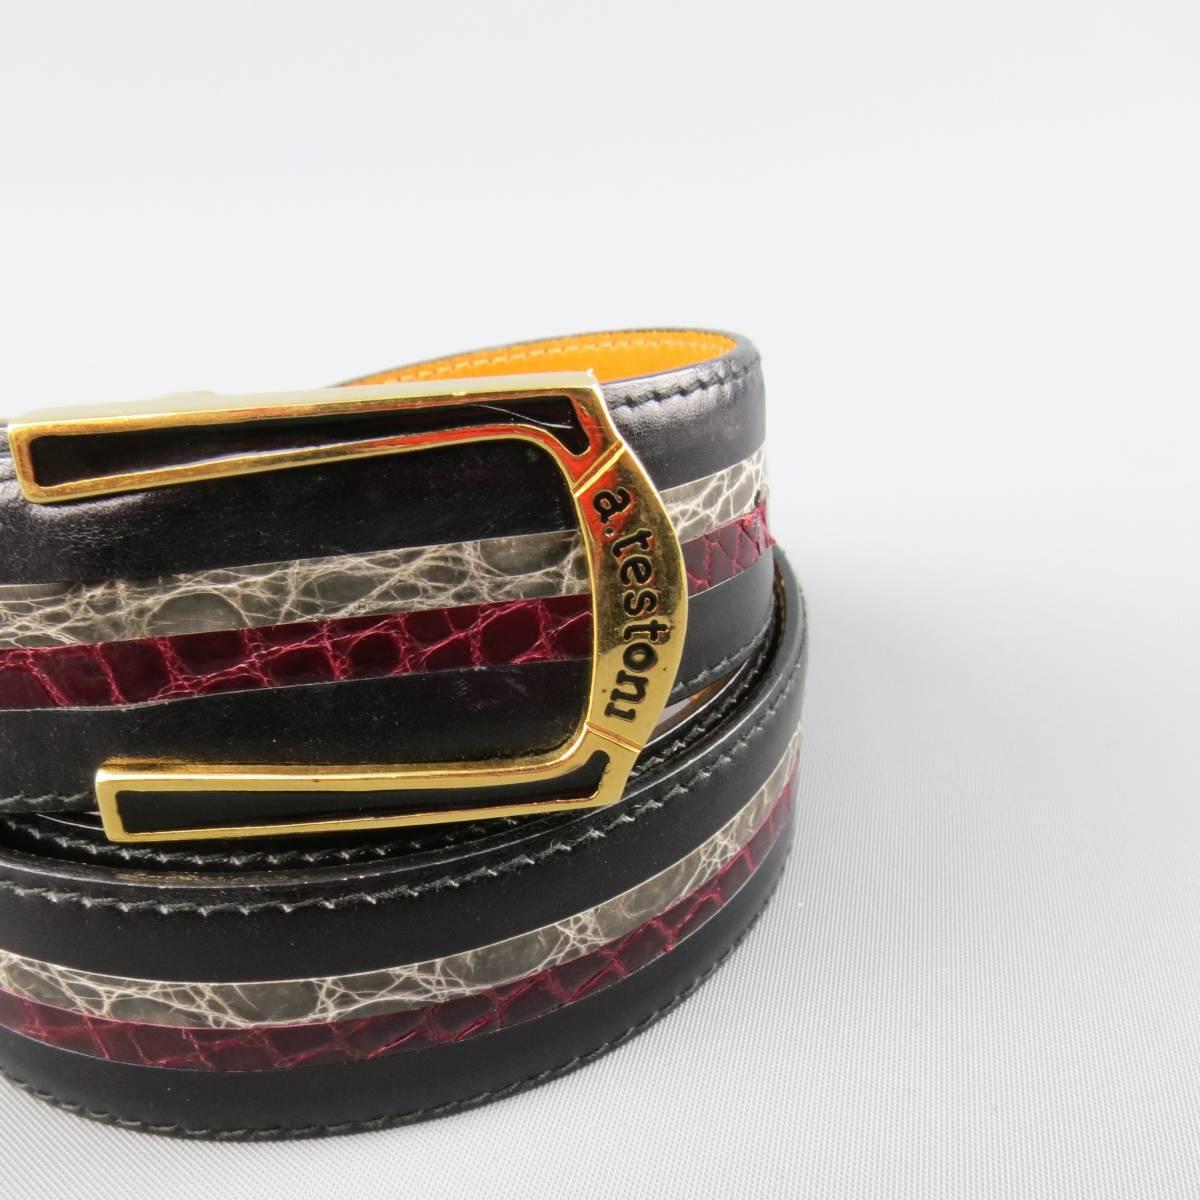 Vintage A. TESTONI dress belt features a smooth black leather strap with burgundy and gray textured stripe and gold tone buckle with black enamel details. Made in Italy.
 
Excellent Pre-Owned Condition.
Marked: 90 / 36
 
Measurements:
 
Length: 42